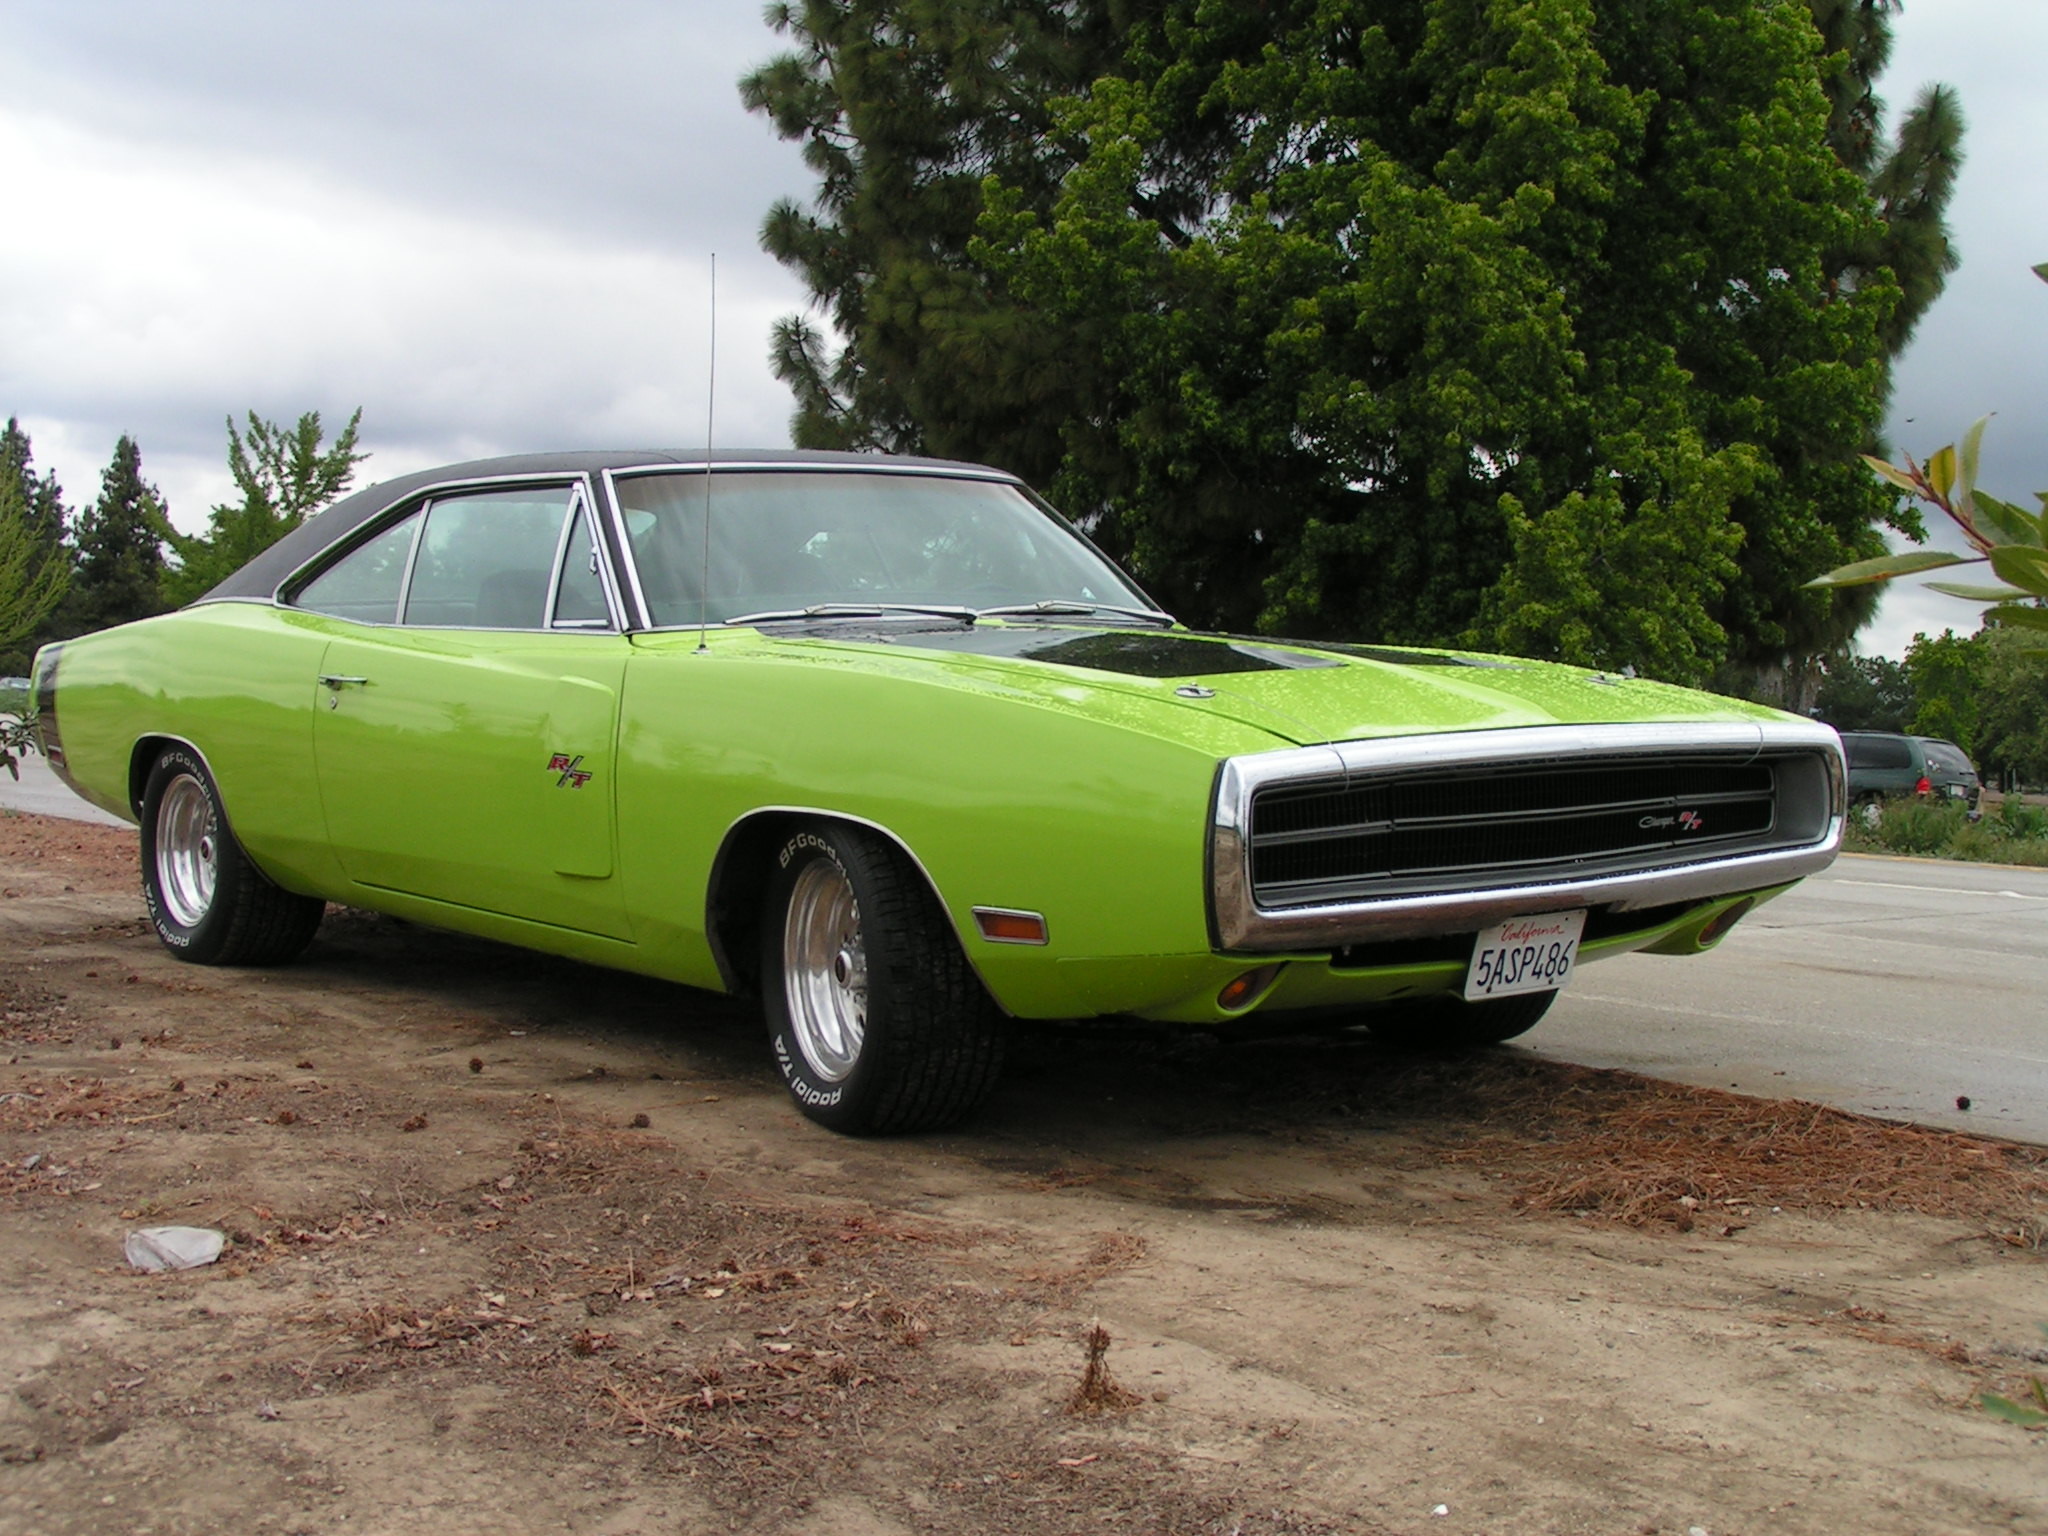 2048x1536 dodge-charger-wallpapers-6.jpg (687067 bytes)